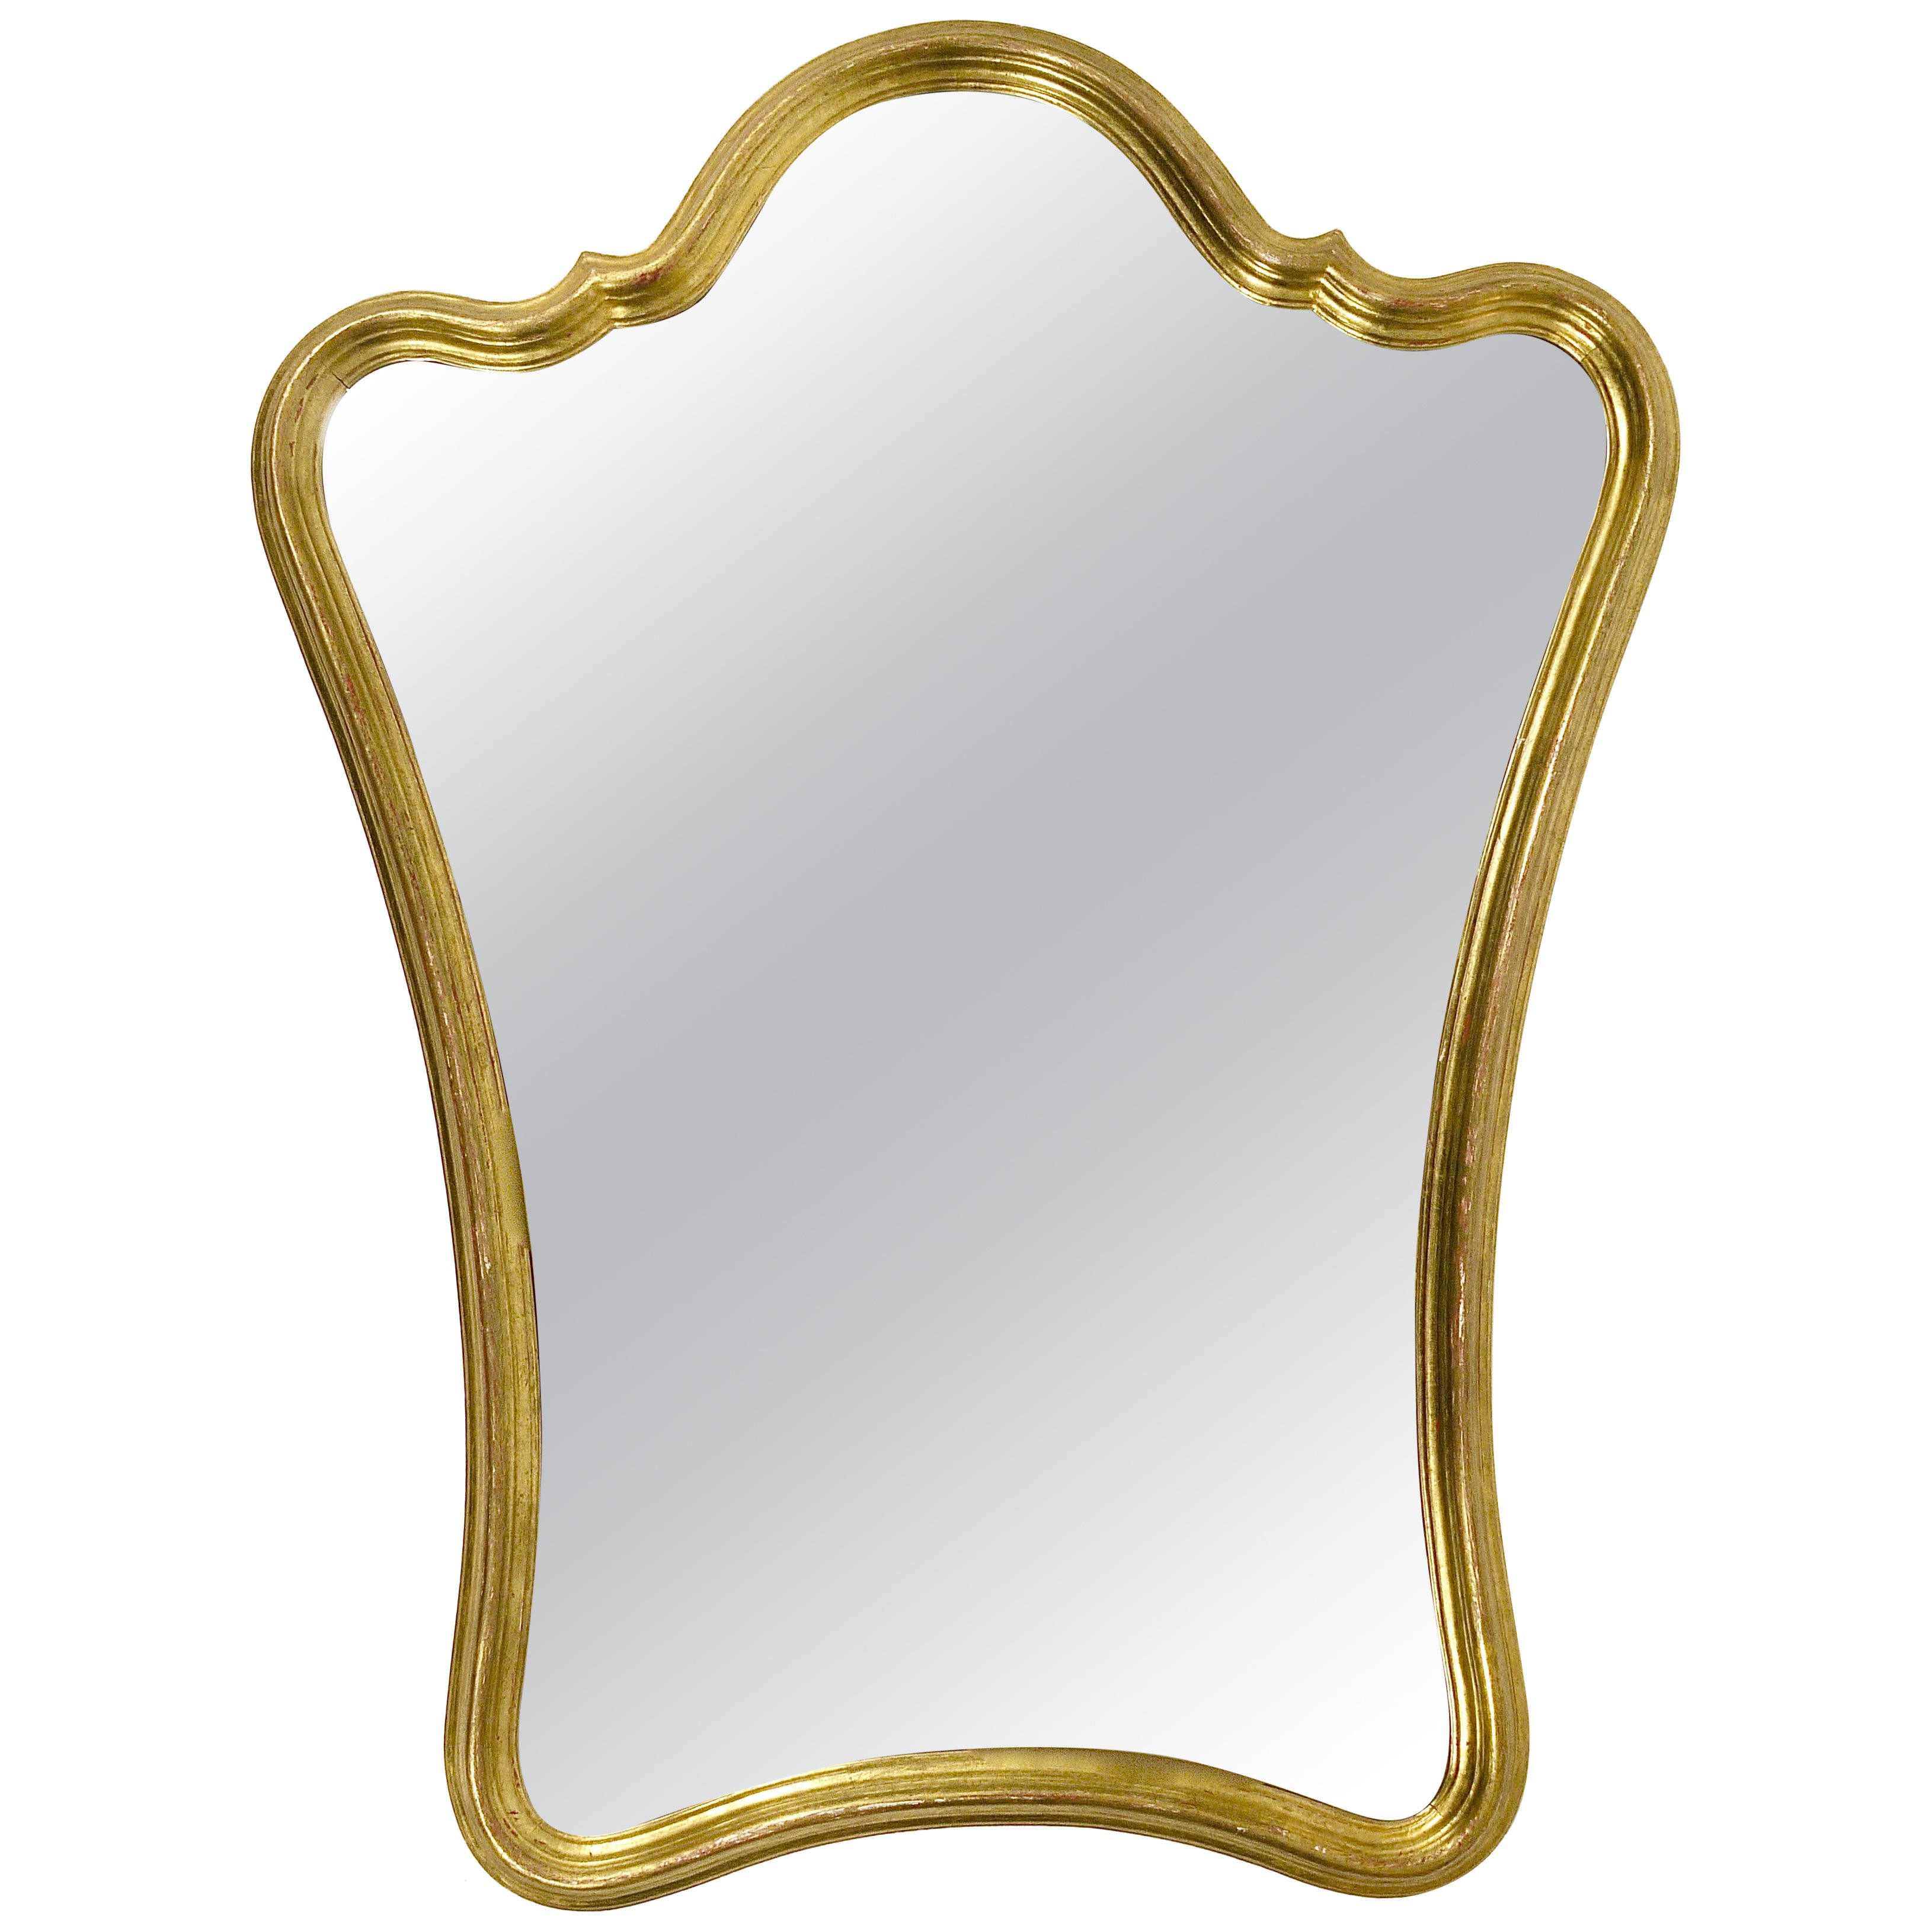 Chelini Firenze Curved Gilt Wood Mid-Century Wall Mirror, Italy, 1950s For Sale